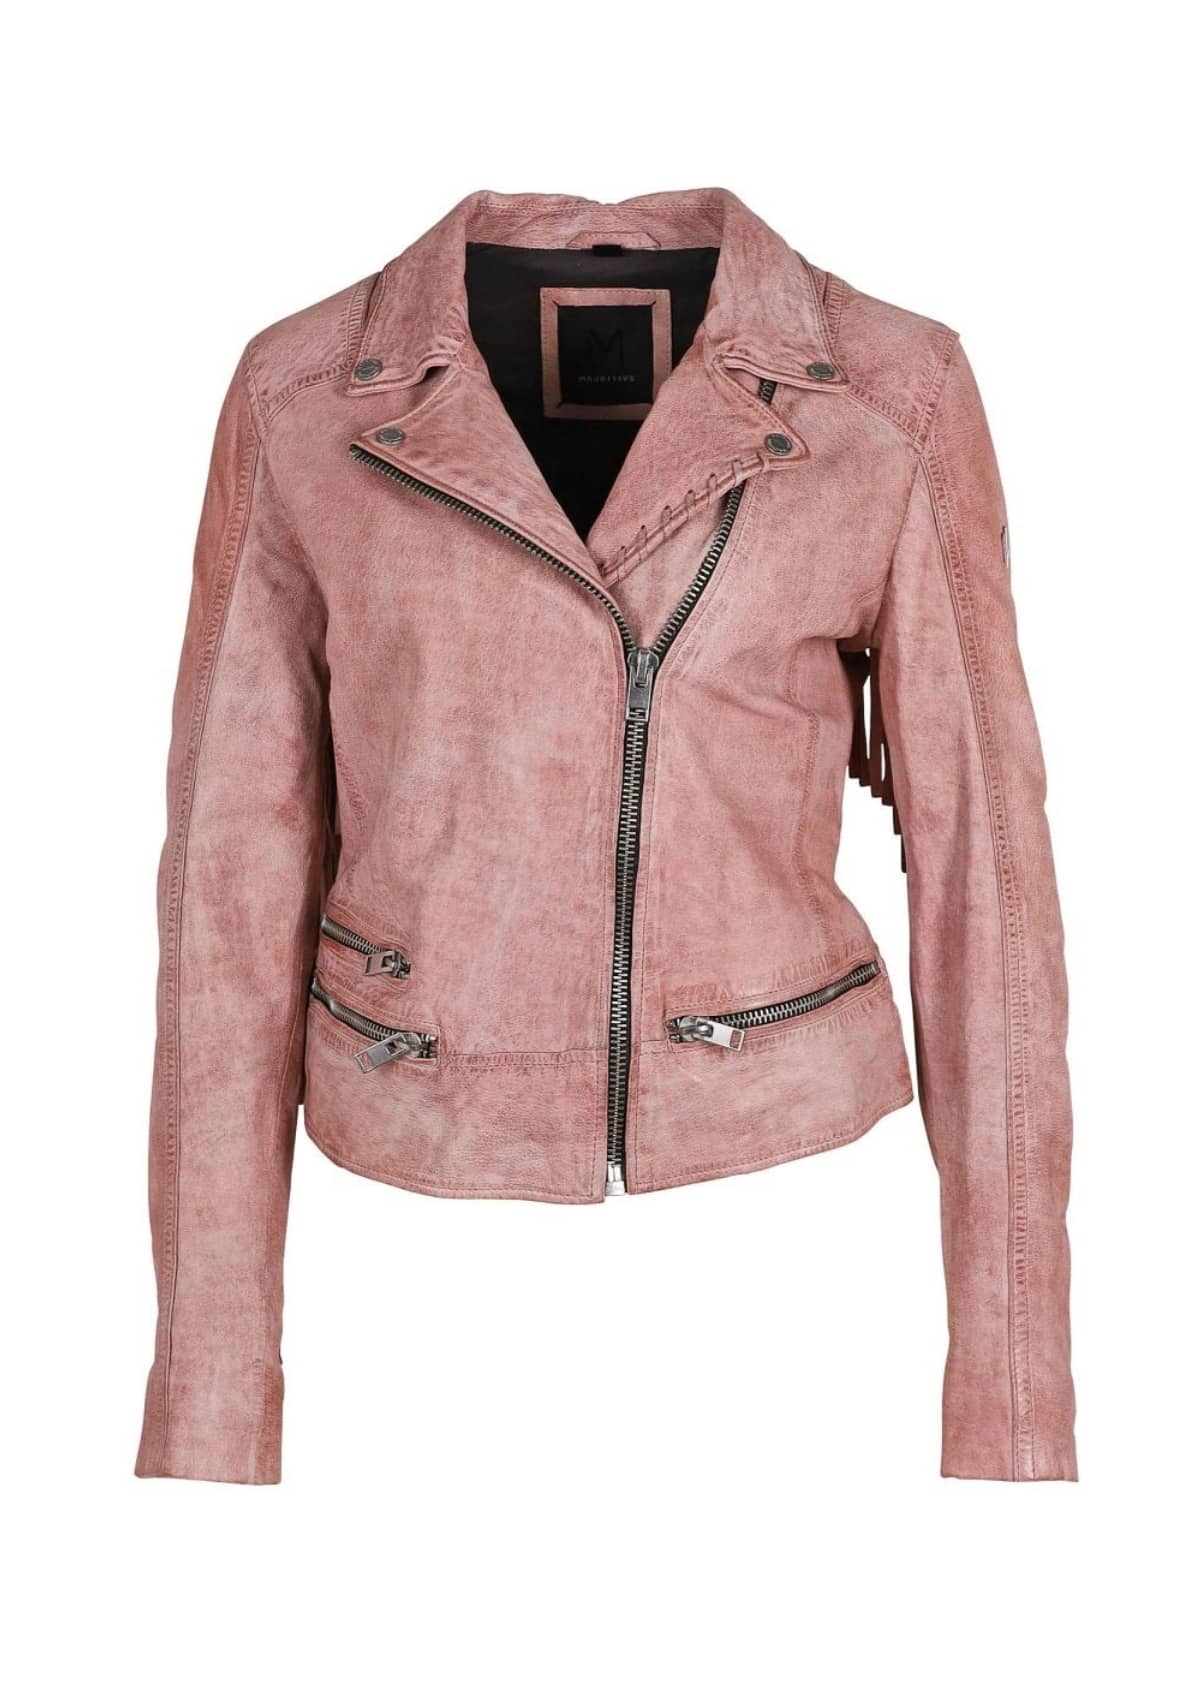 Side zipper and collared distressed pink women's leather jacket.